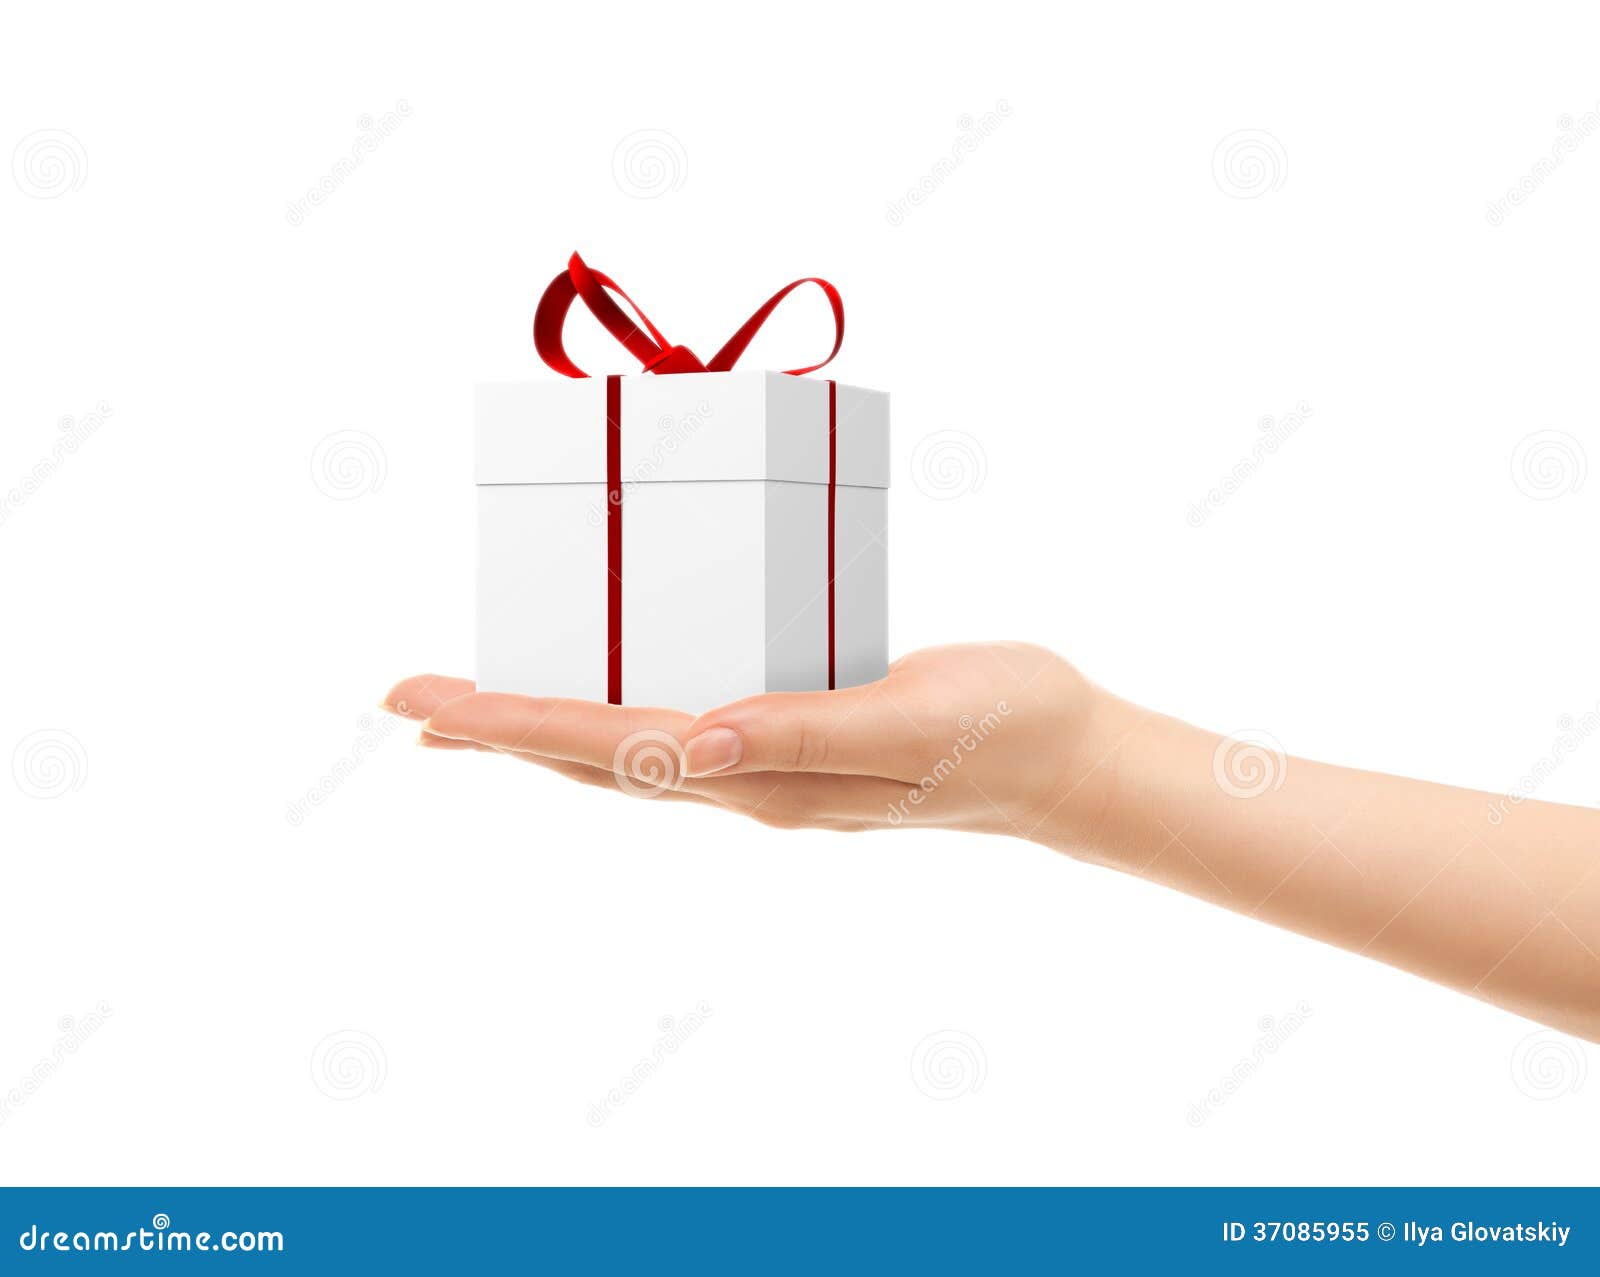 picture of woman's hands holding a gift box